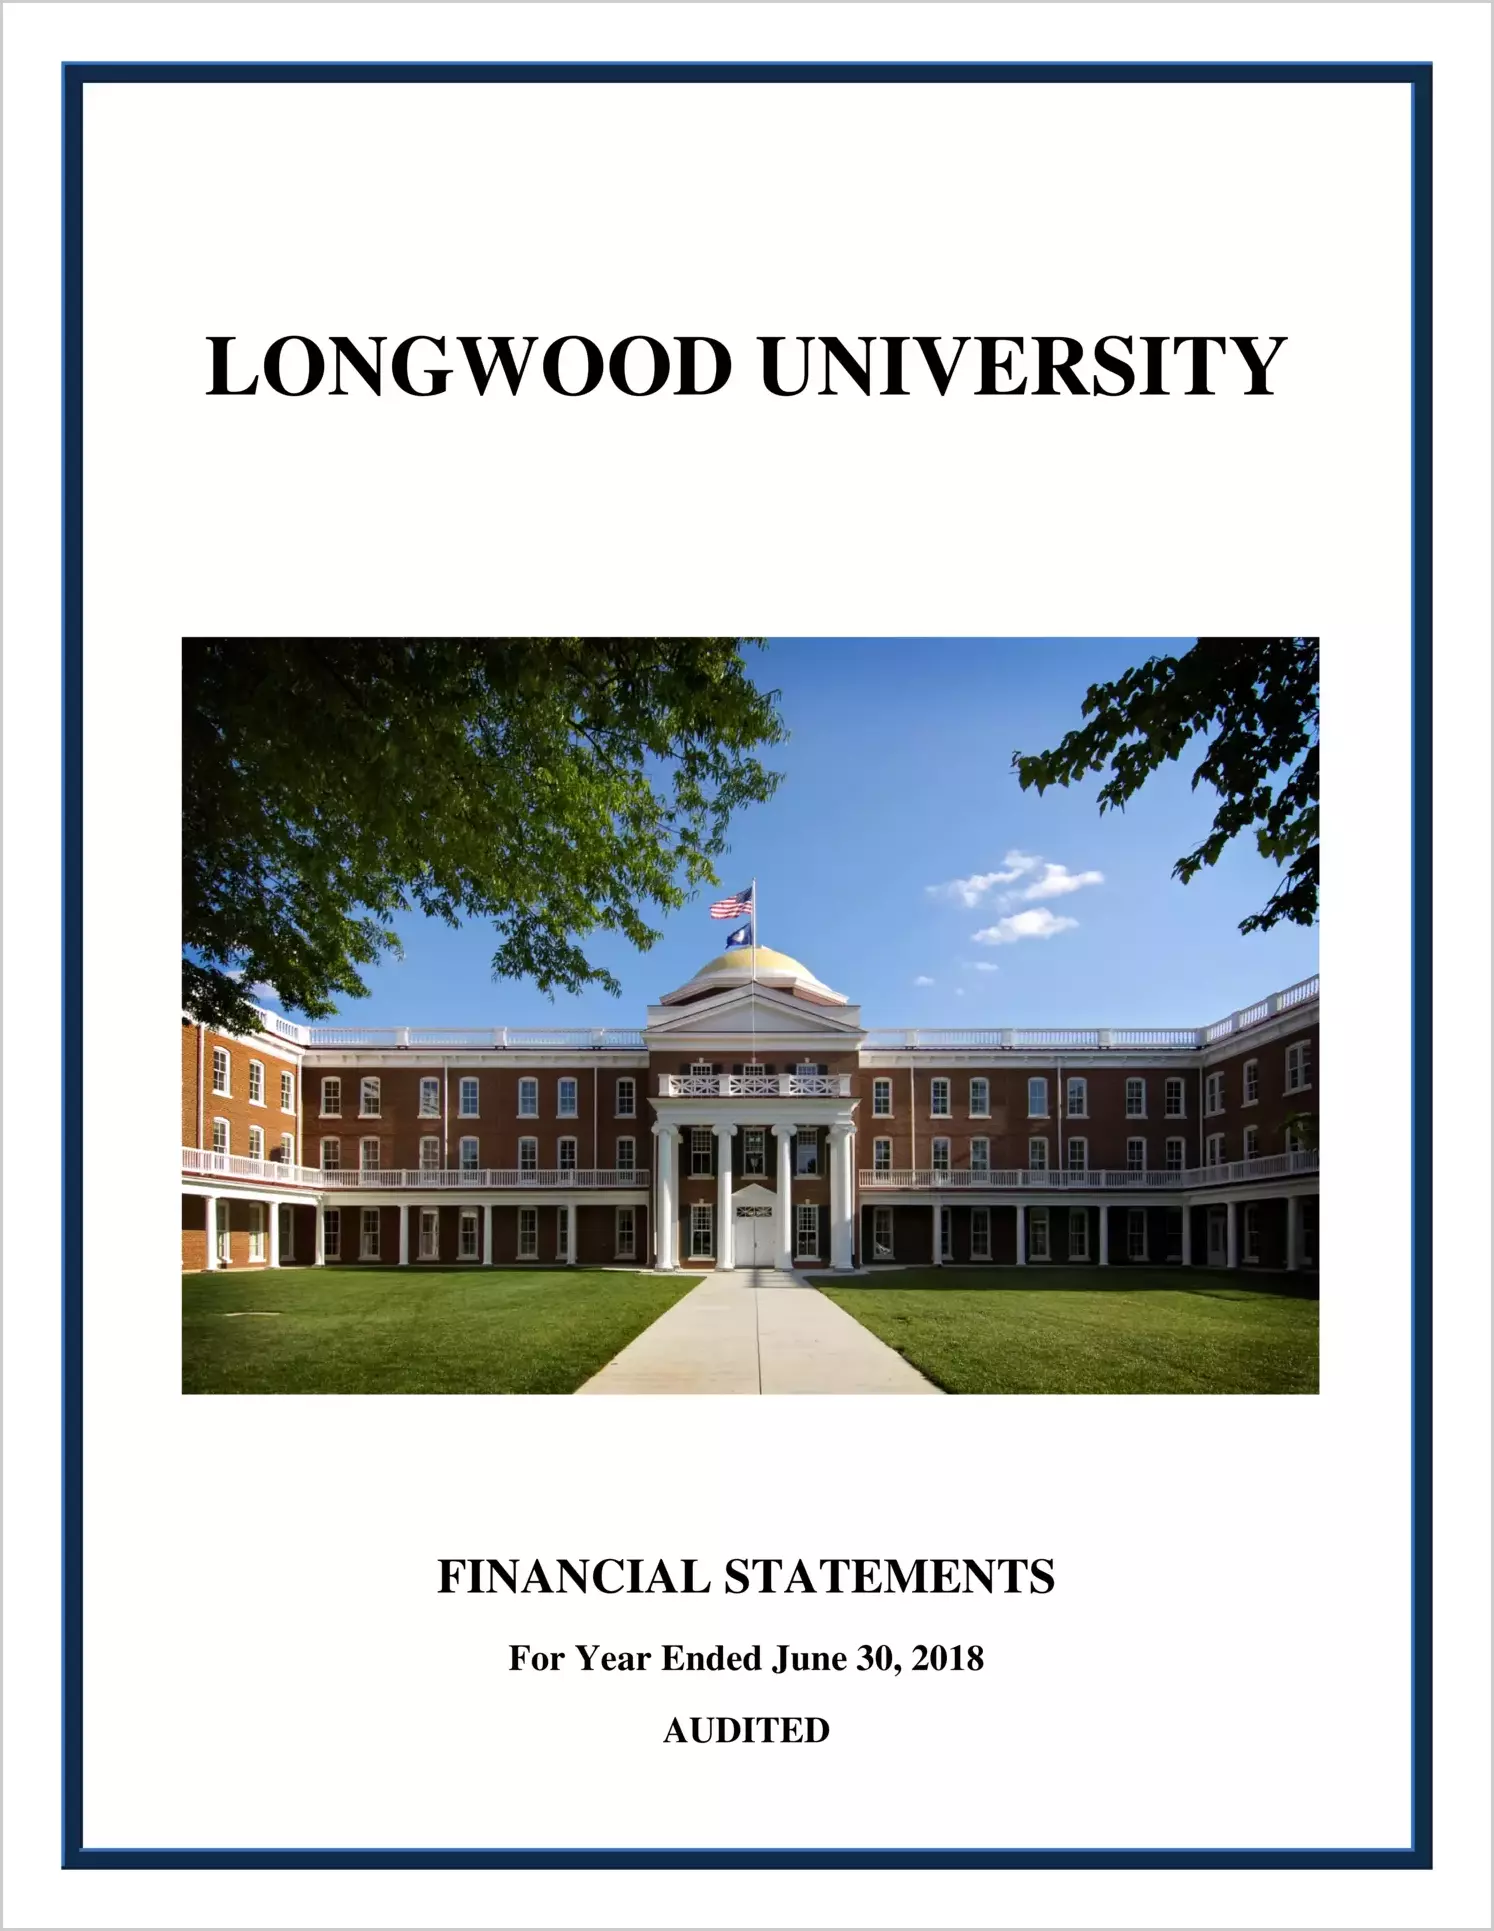 Longwood University Financial Statements for the year ended June 30, 2018